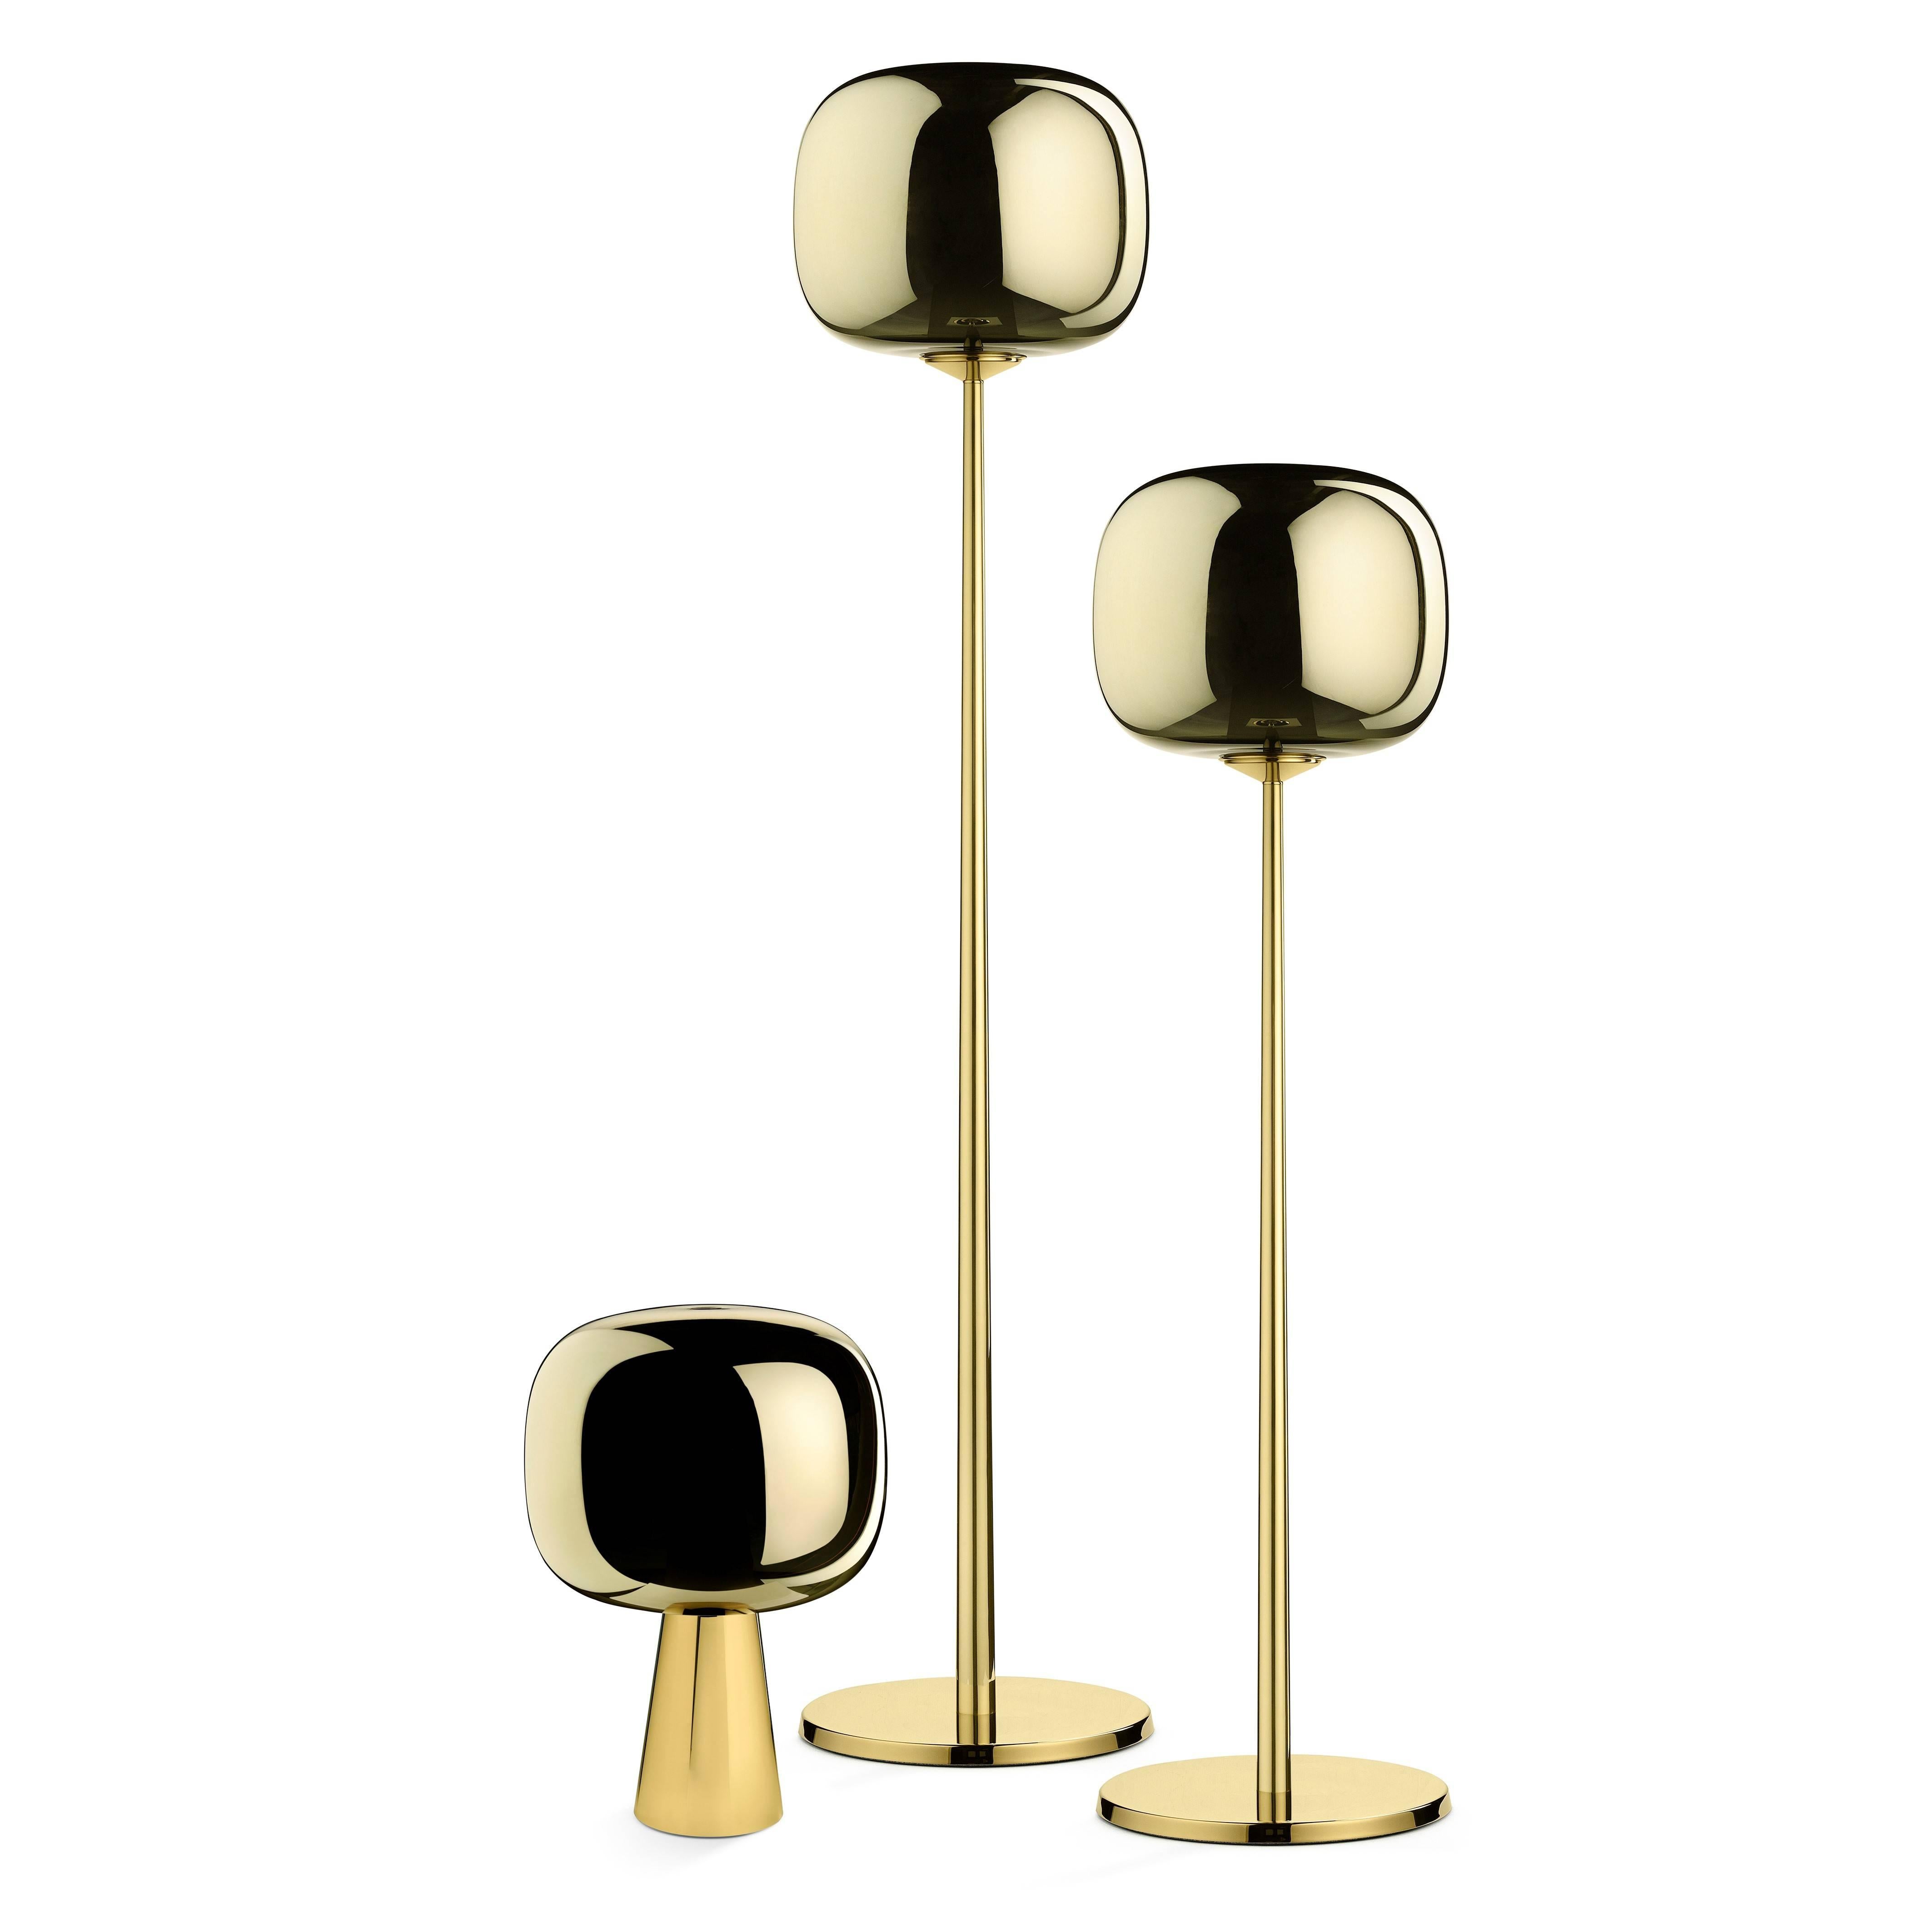 Dusk dawn lower floor lamp in polished brass and metalized glass designed by Branch for Ghidini, 1961.

Dimensions: Ø35 x 145 H cm.